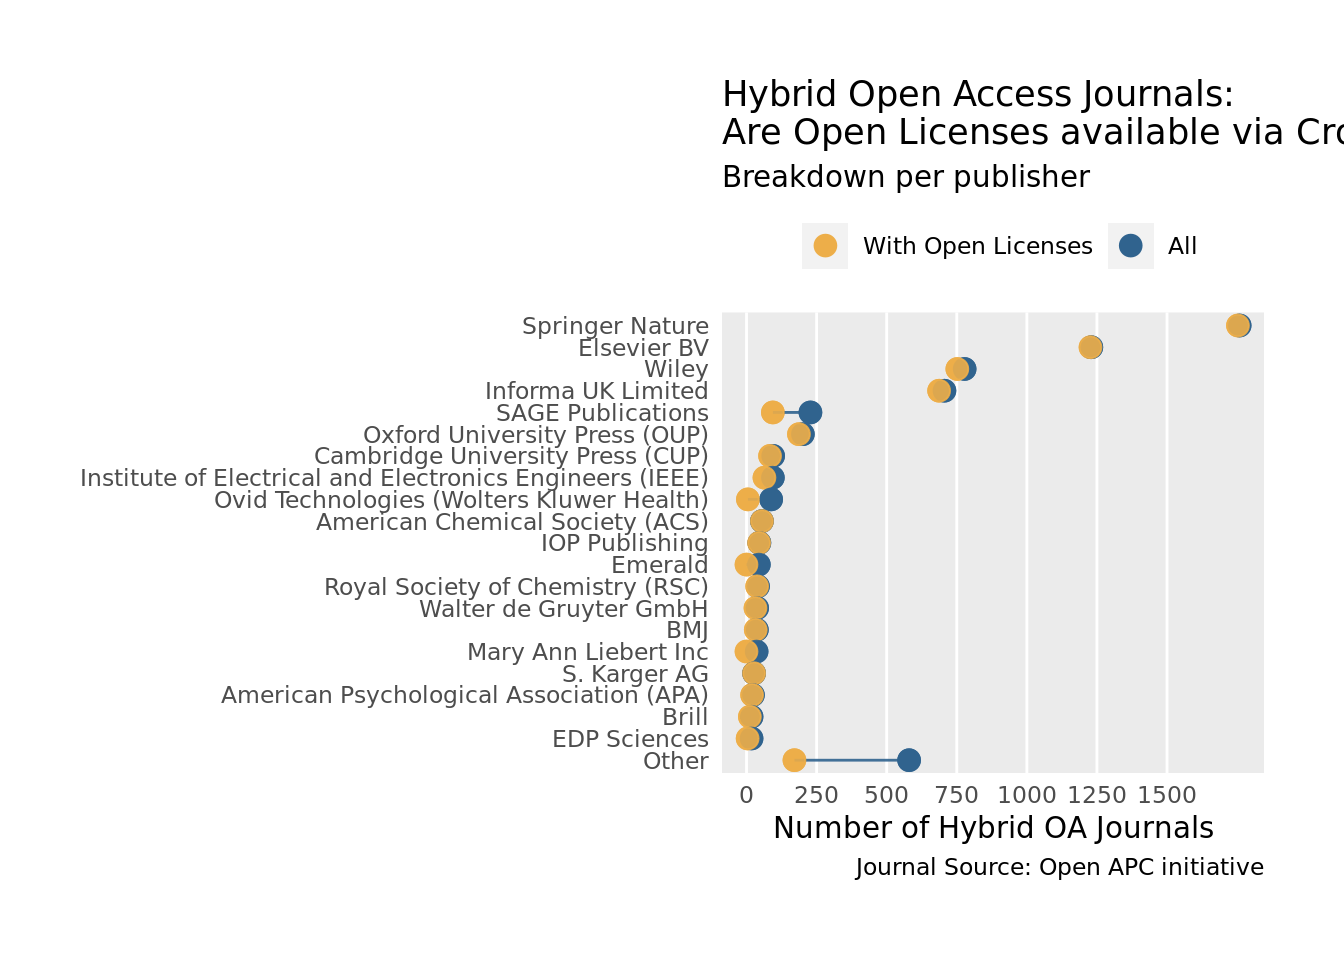 Overview of Crossref licensing coverage per publisher